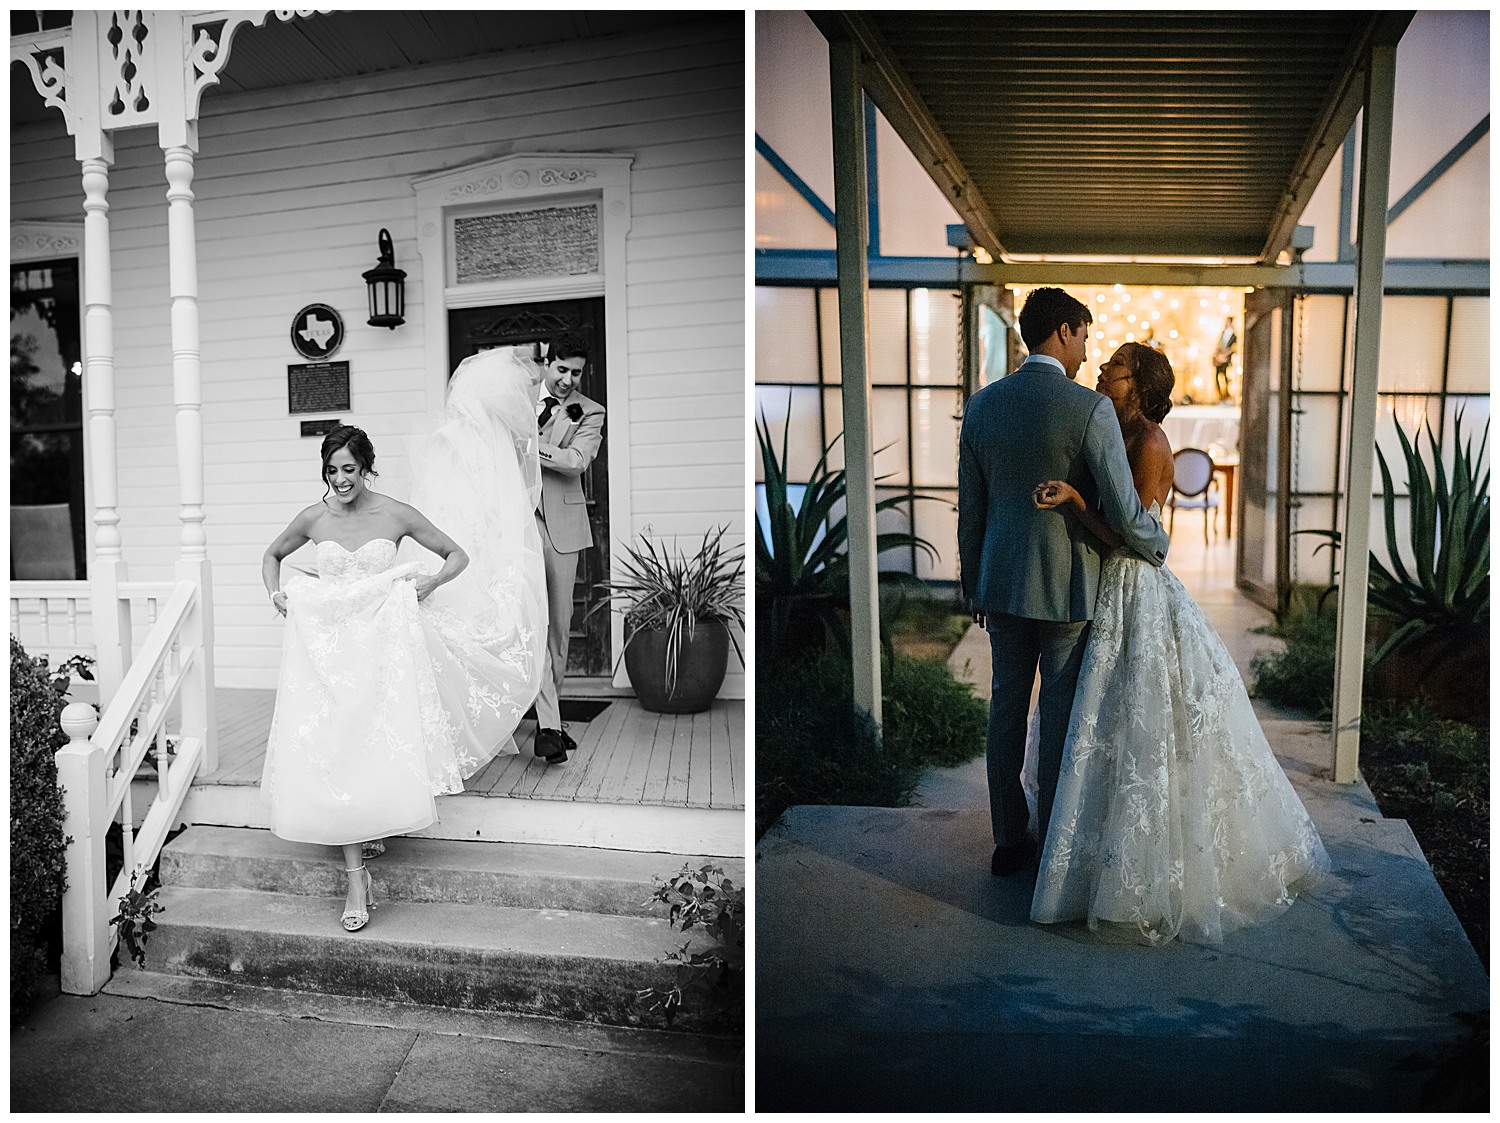 Left shows couple descending steps at Barr Mansion, Texas and right shows a couple waiitng to be announced at wedding reception